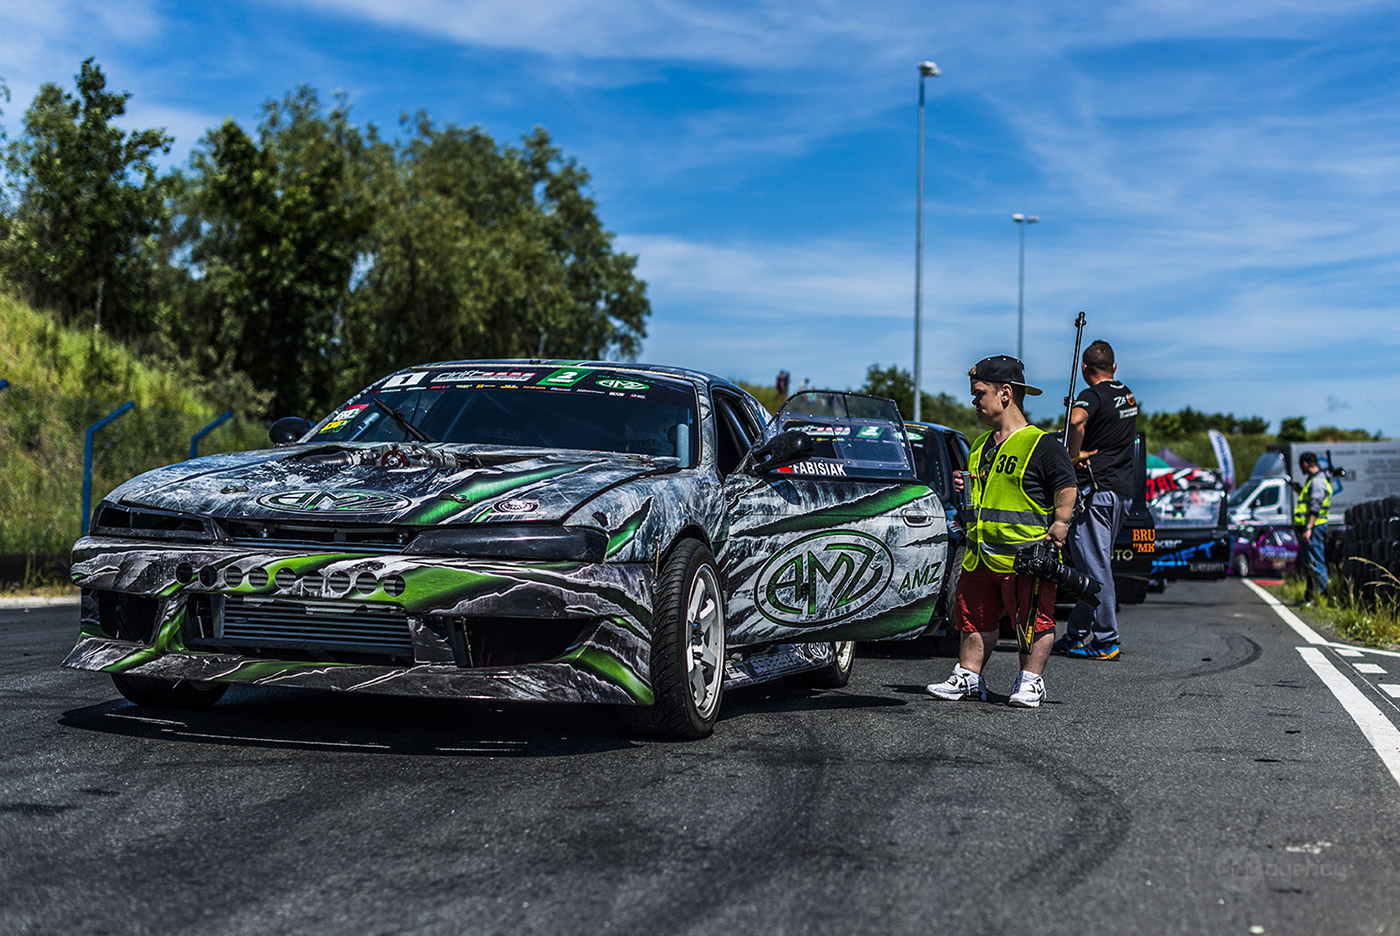 drift girls Cars fast Competition details Fun